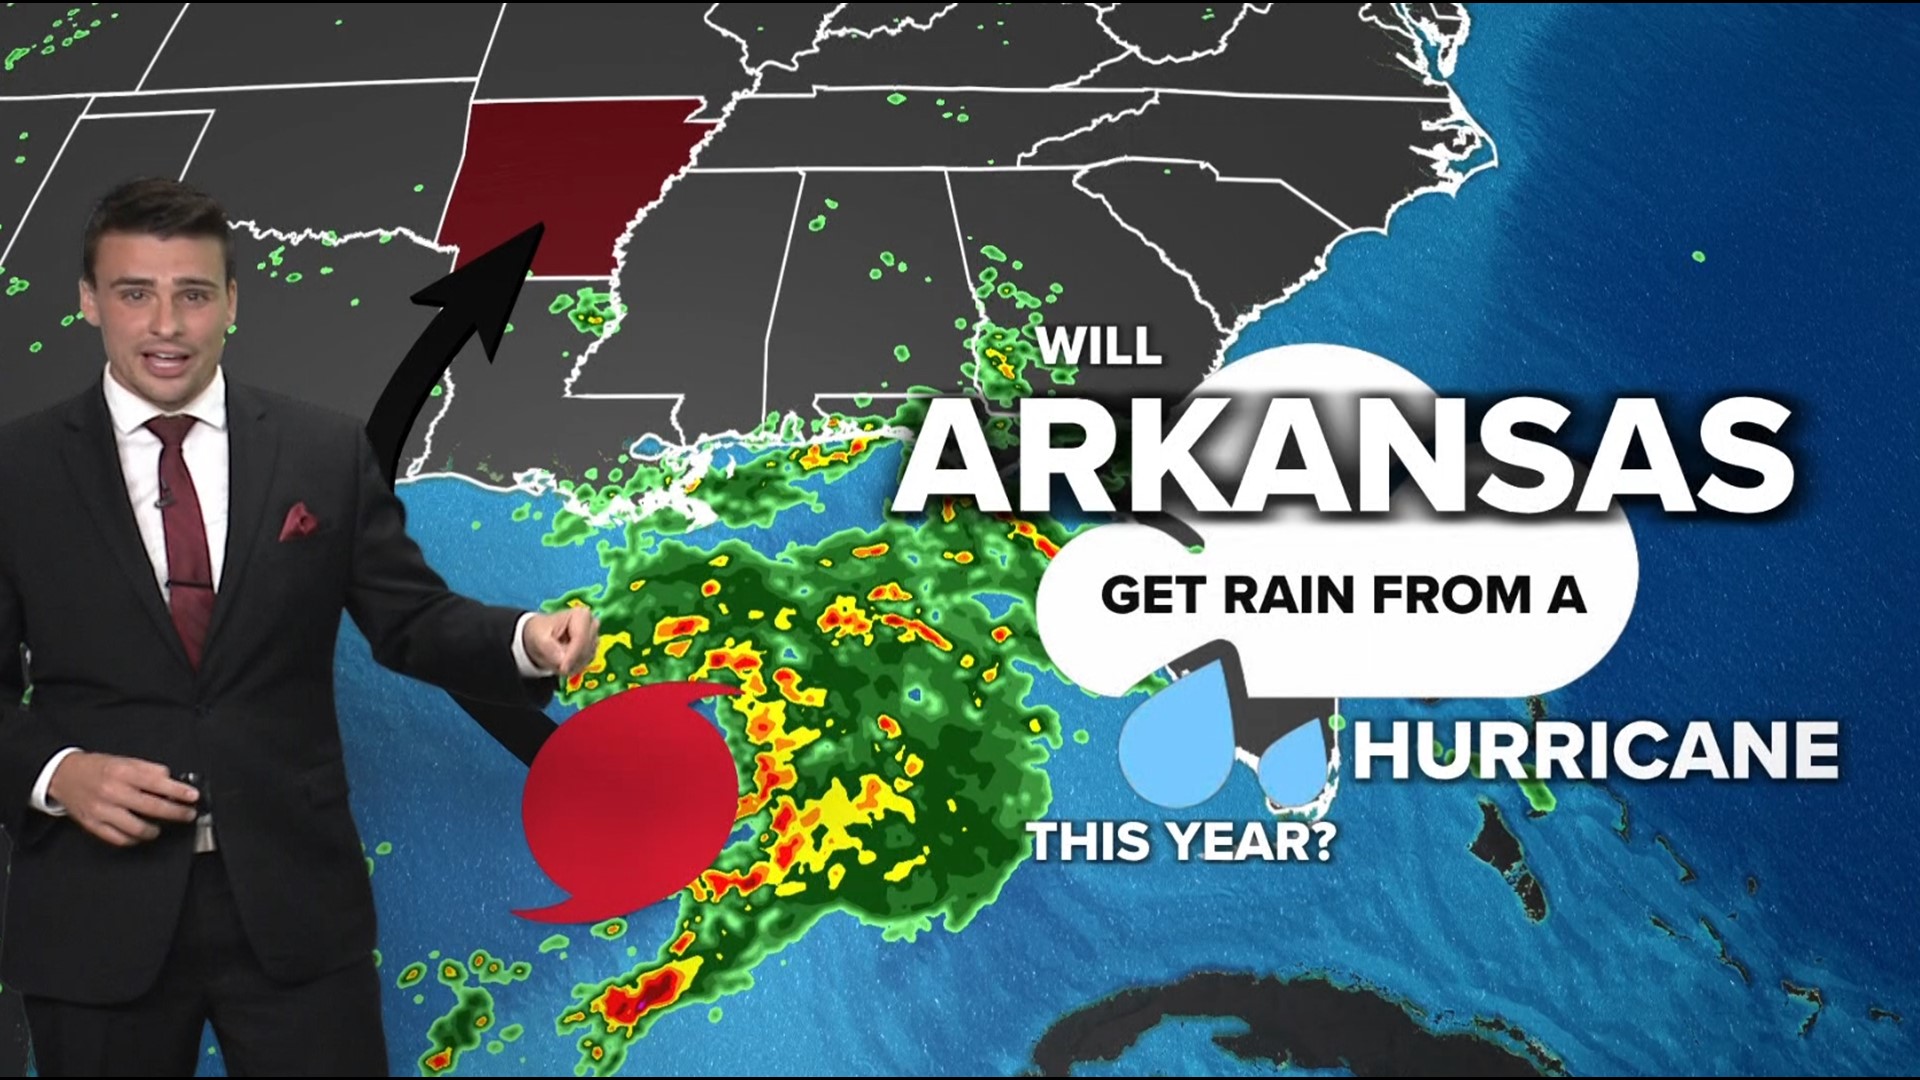 Most times storms hit and move too far to the east to bring much rain to Arkansas, but when they do it helps the local dry season. What are this summer's chances?